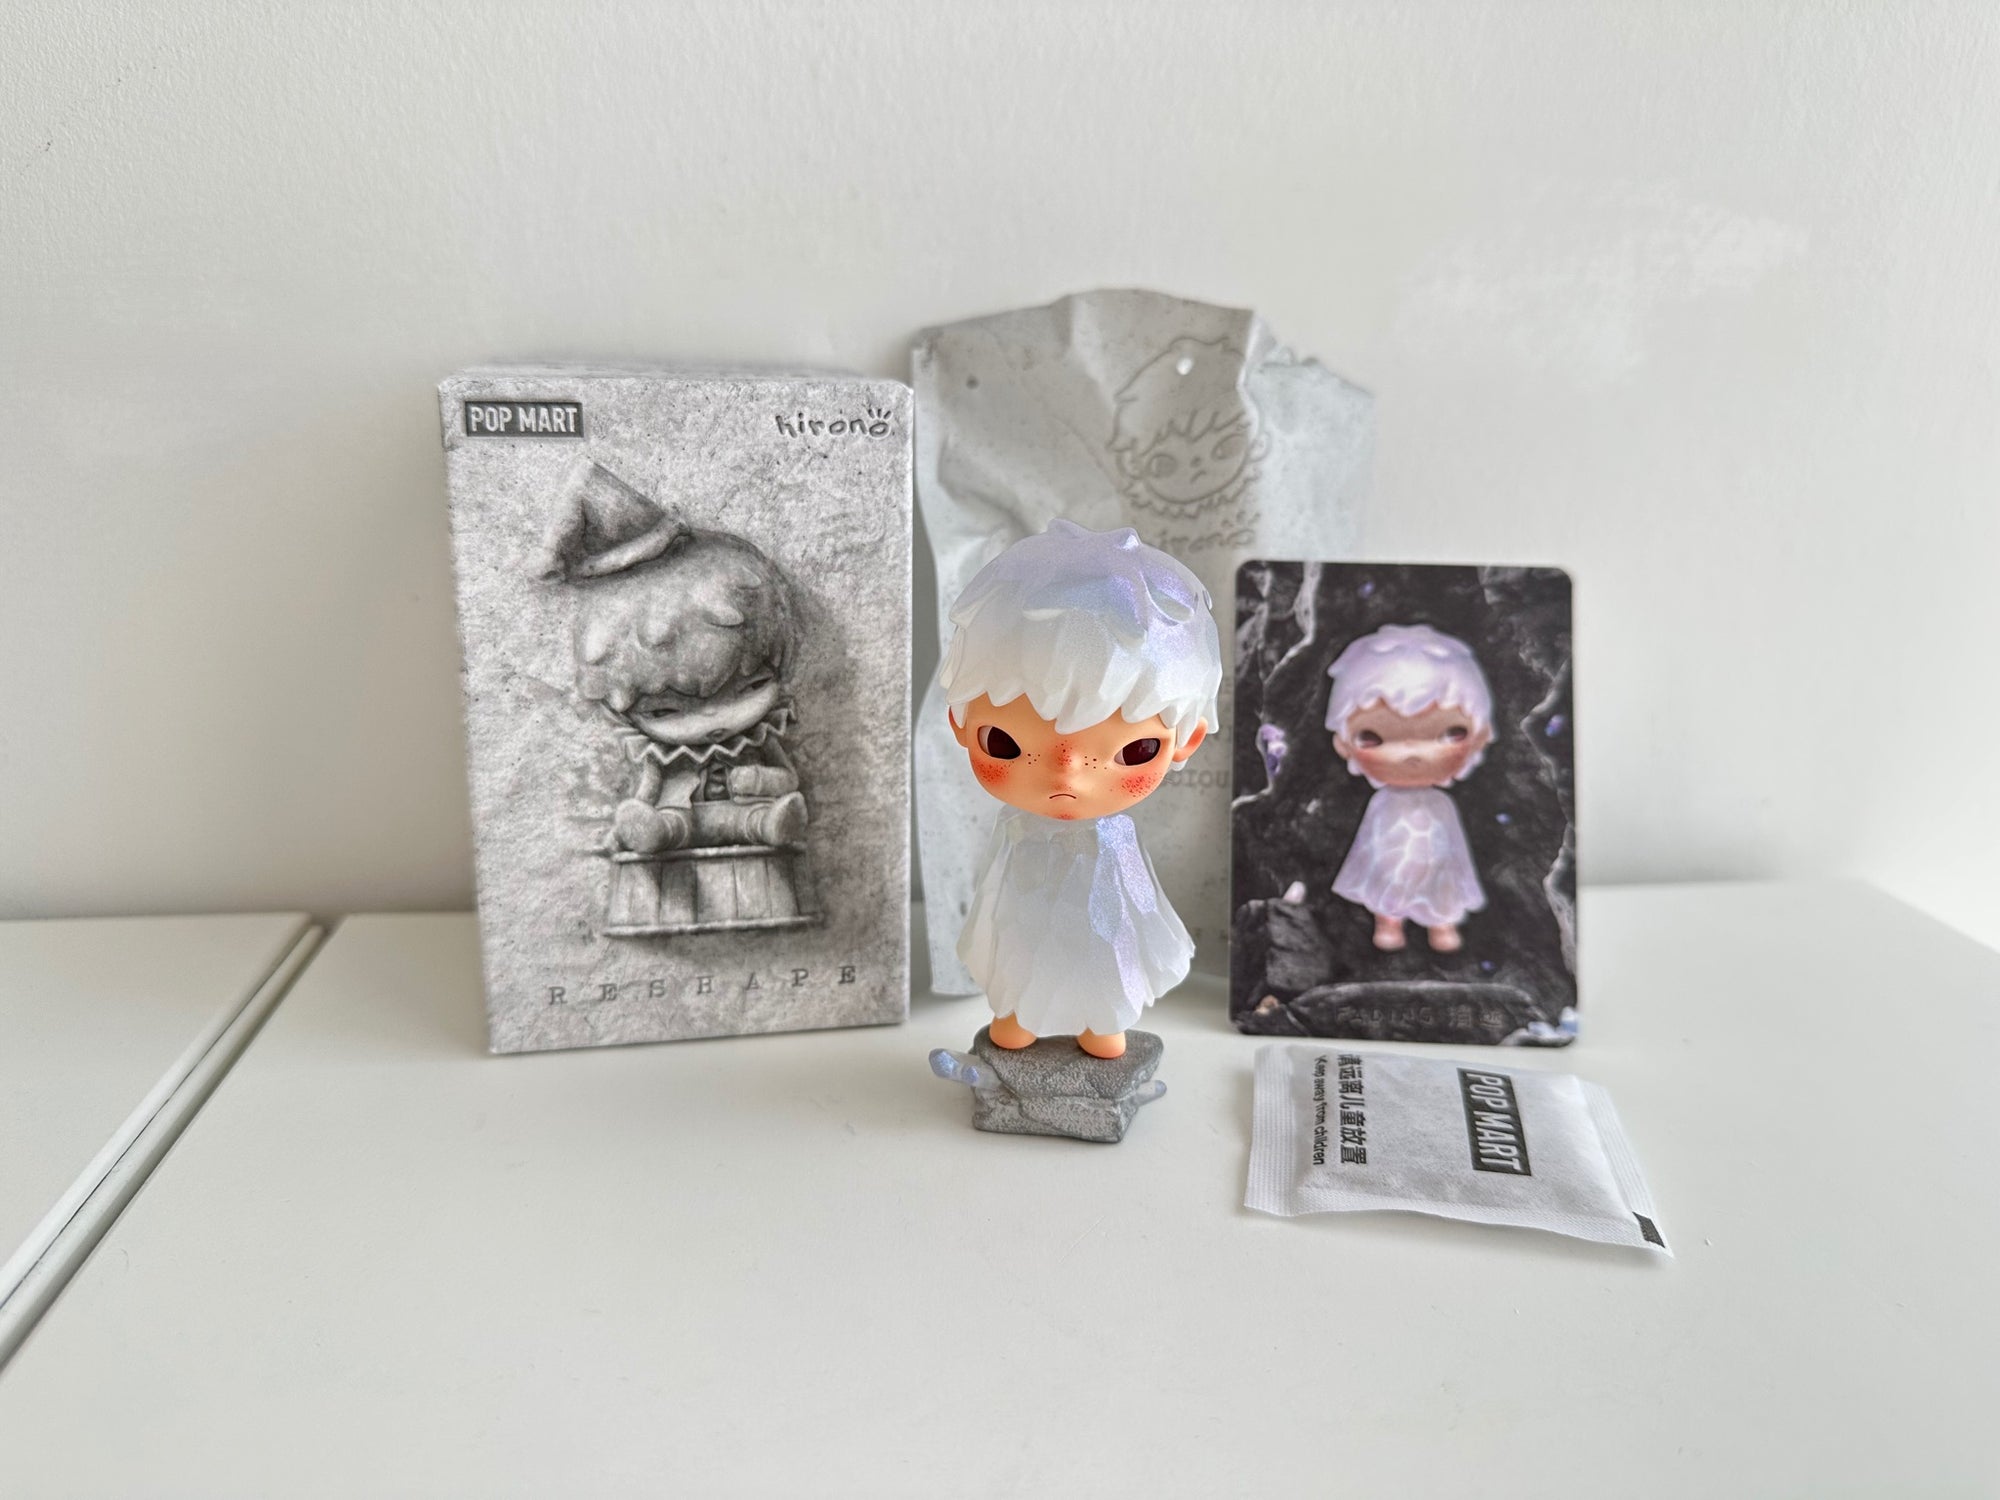 Fading - Hirono Reshape Series Figures Blind Box by POP MART - 1